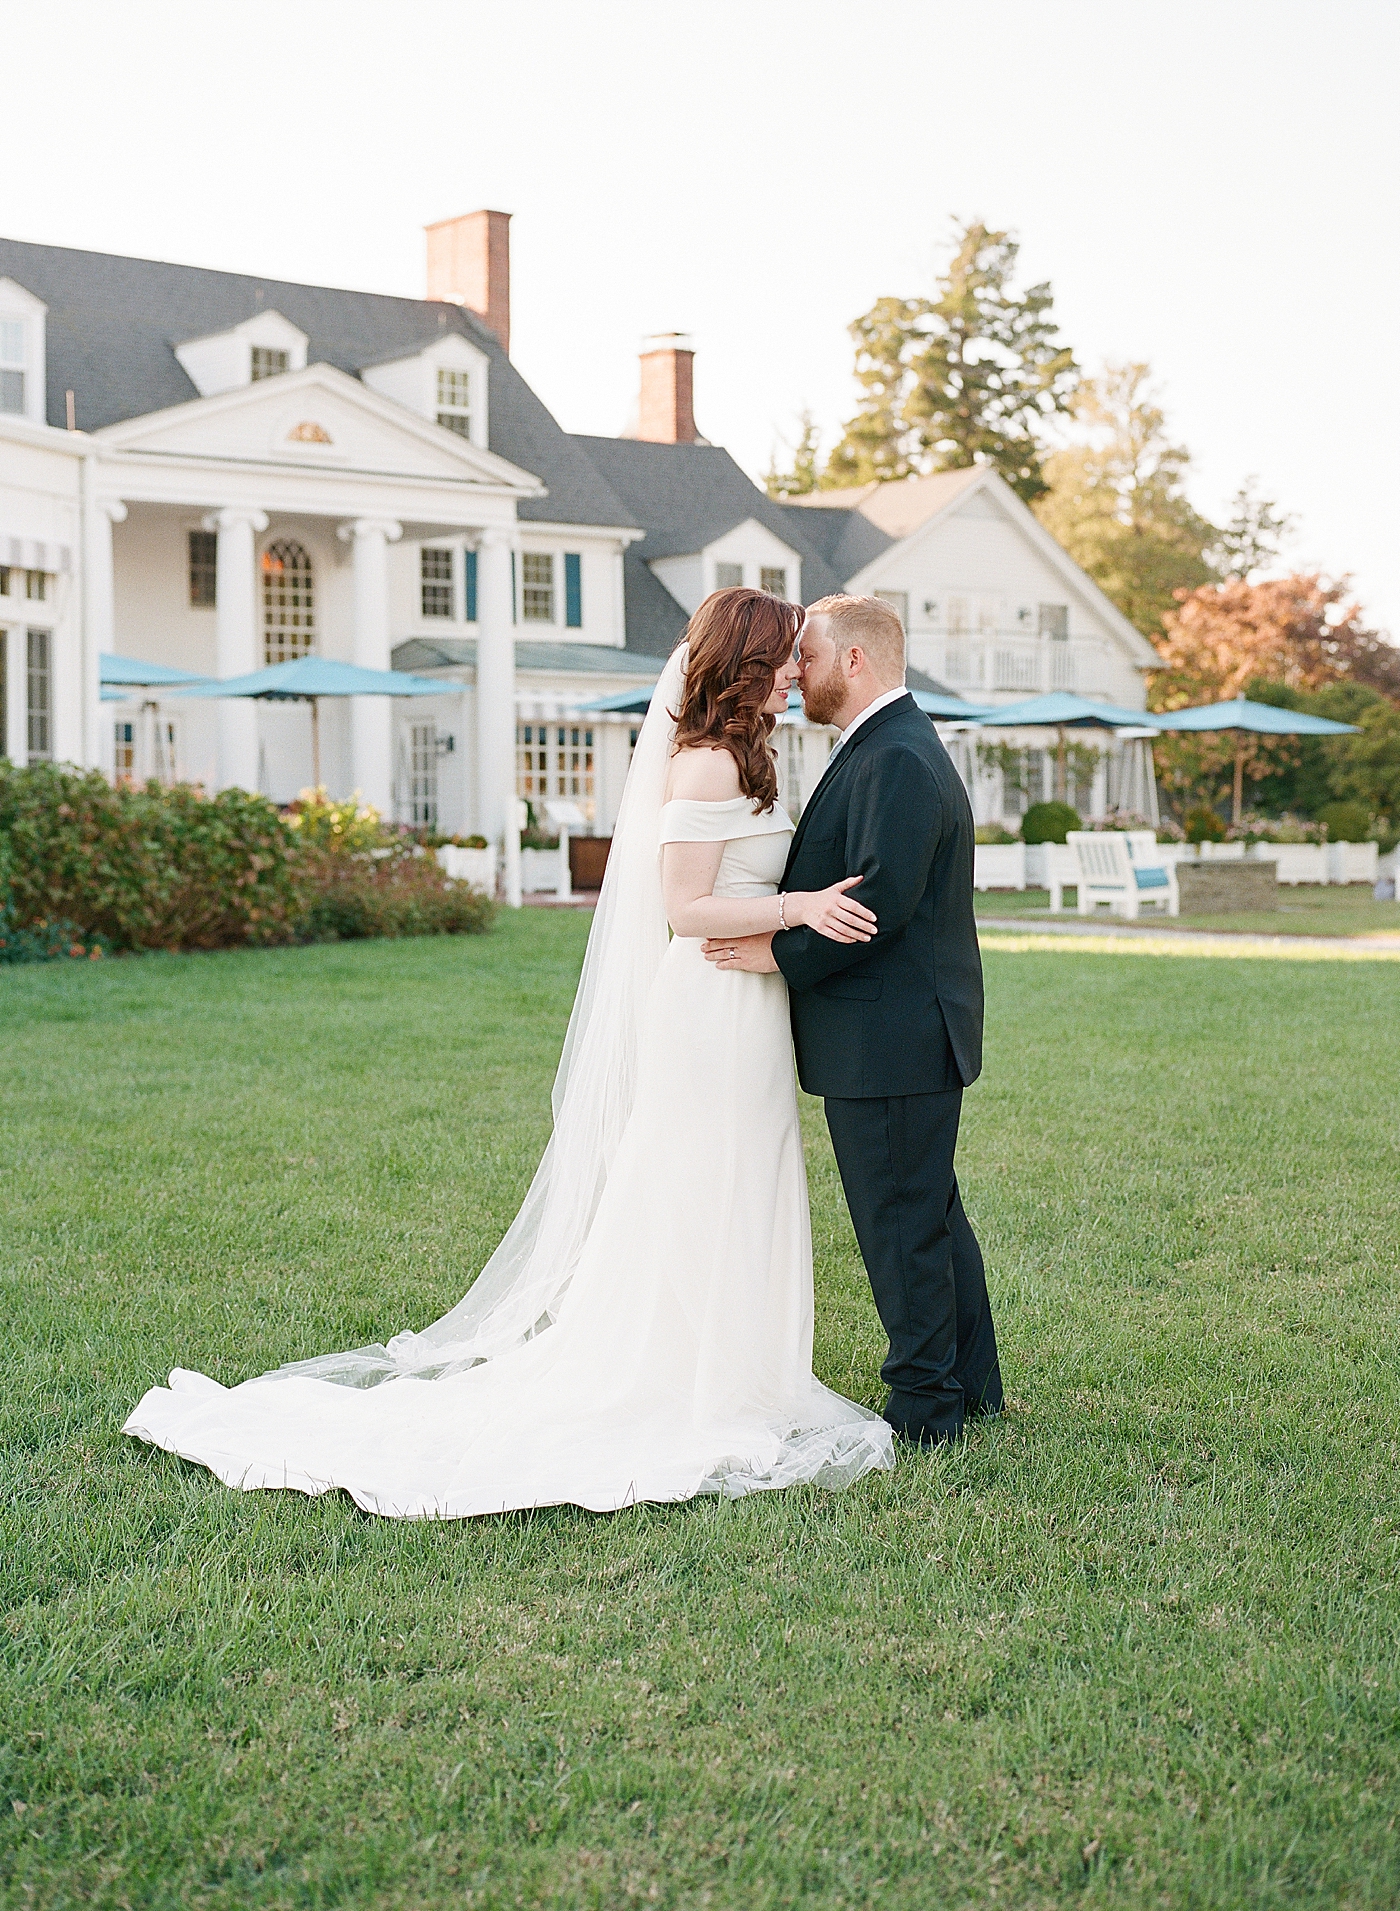 Bride and groom kissing on a lawn in front of a big white house | Photo by Hope Helmuth Photography